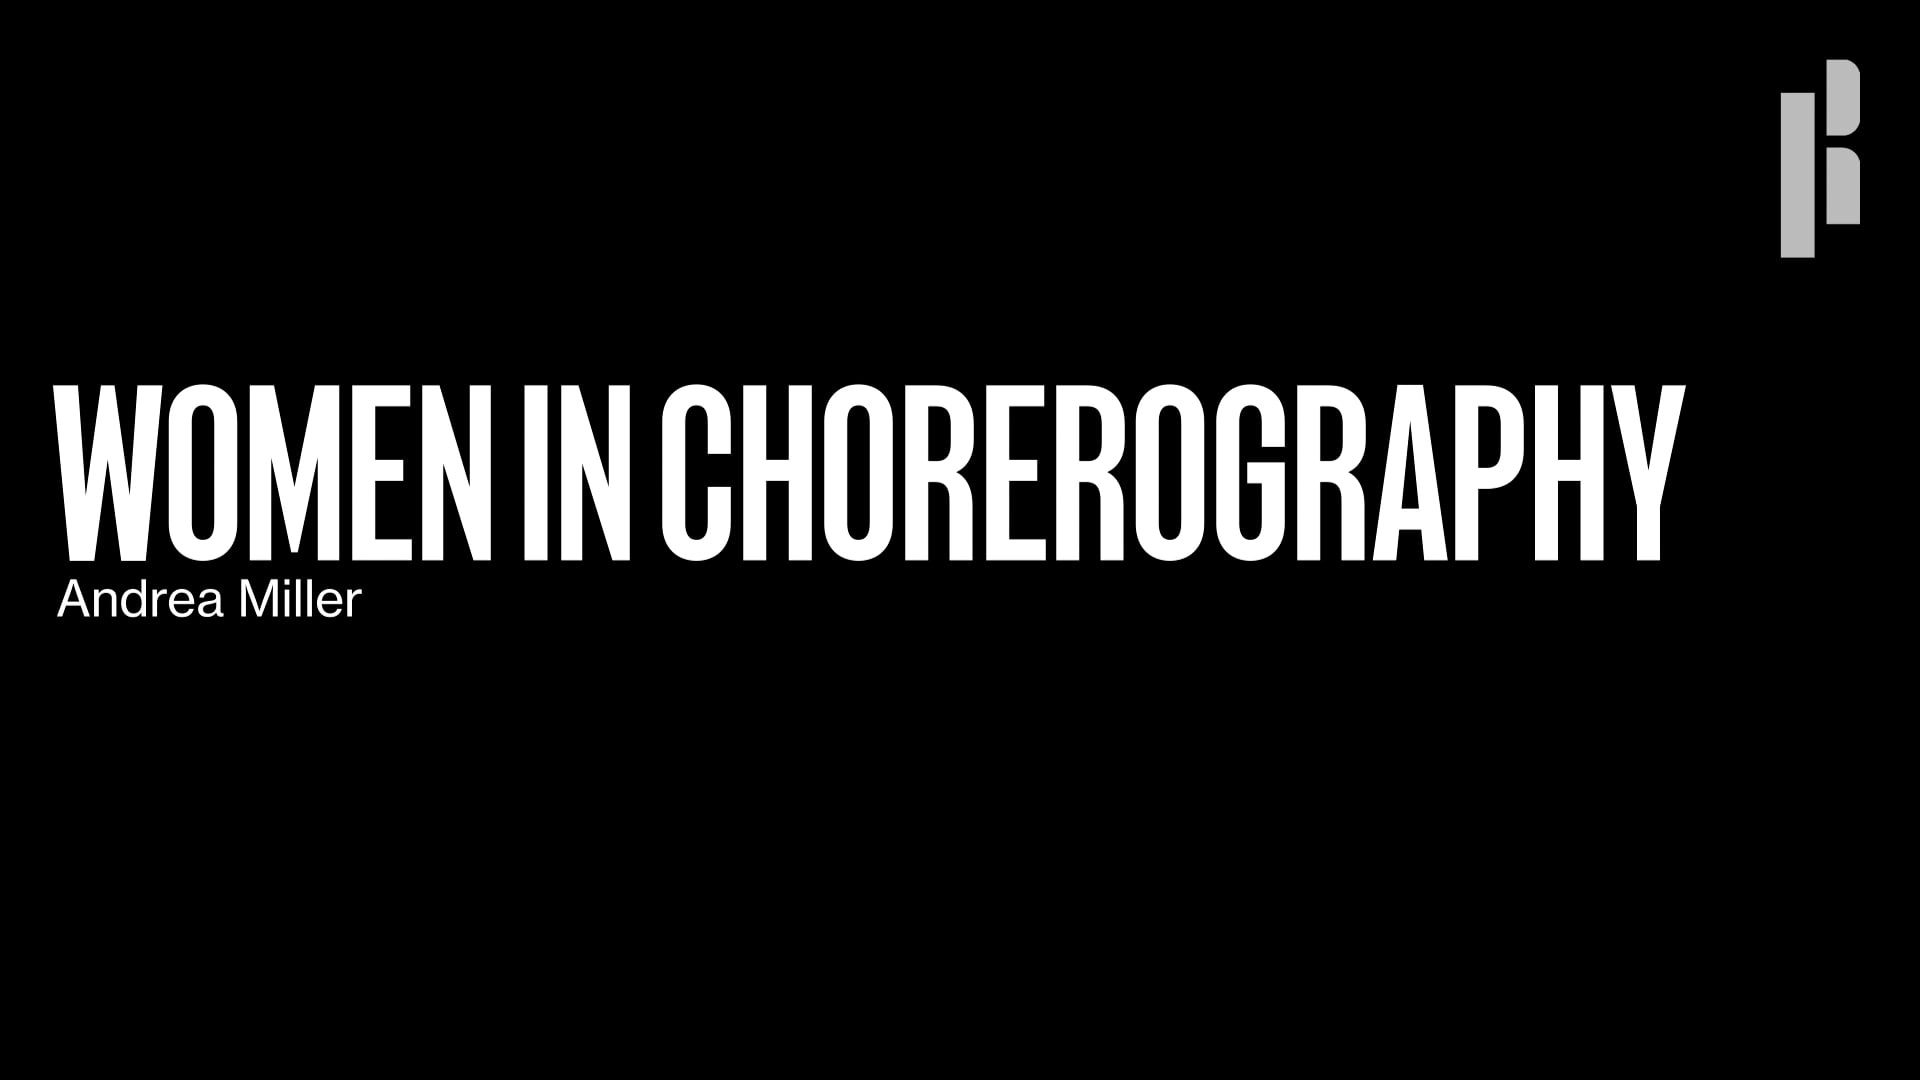 The cover of women in choreography.